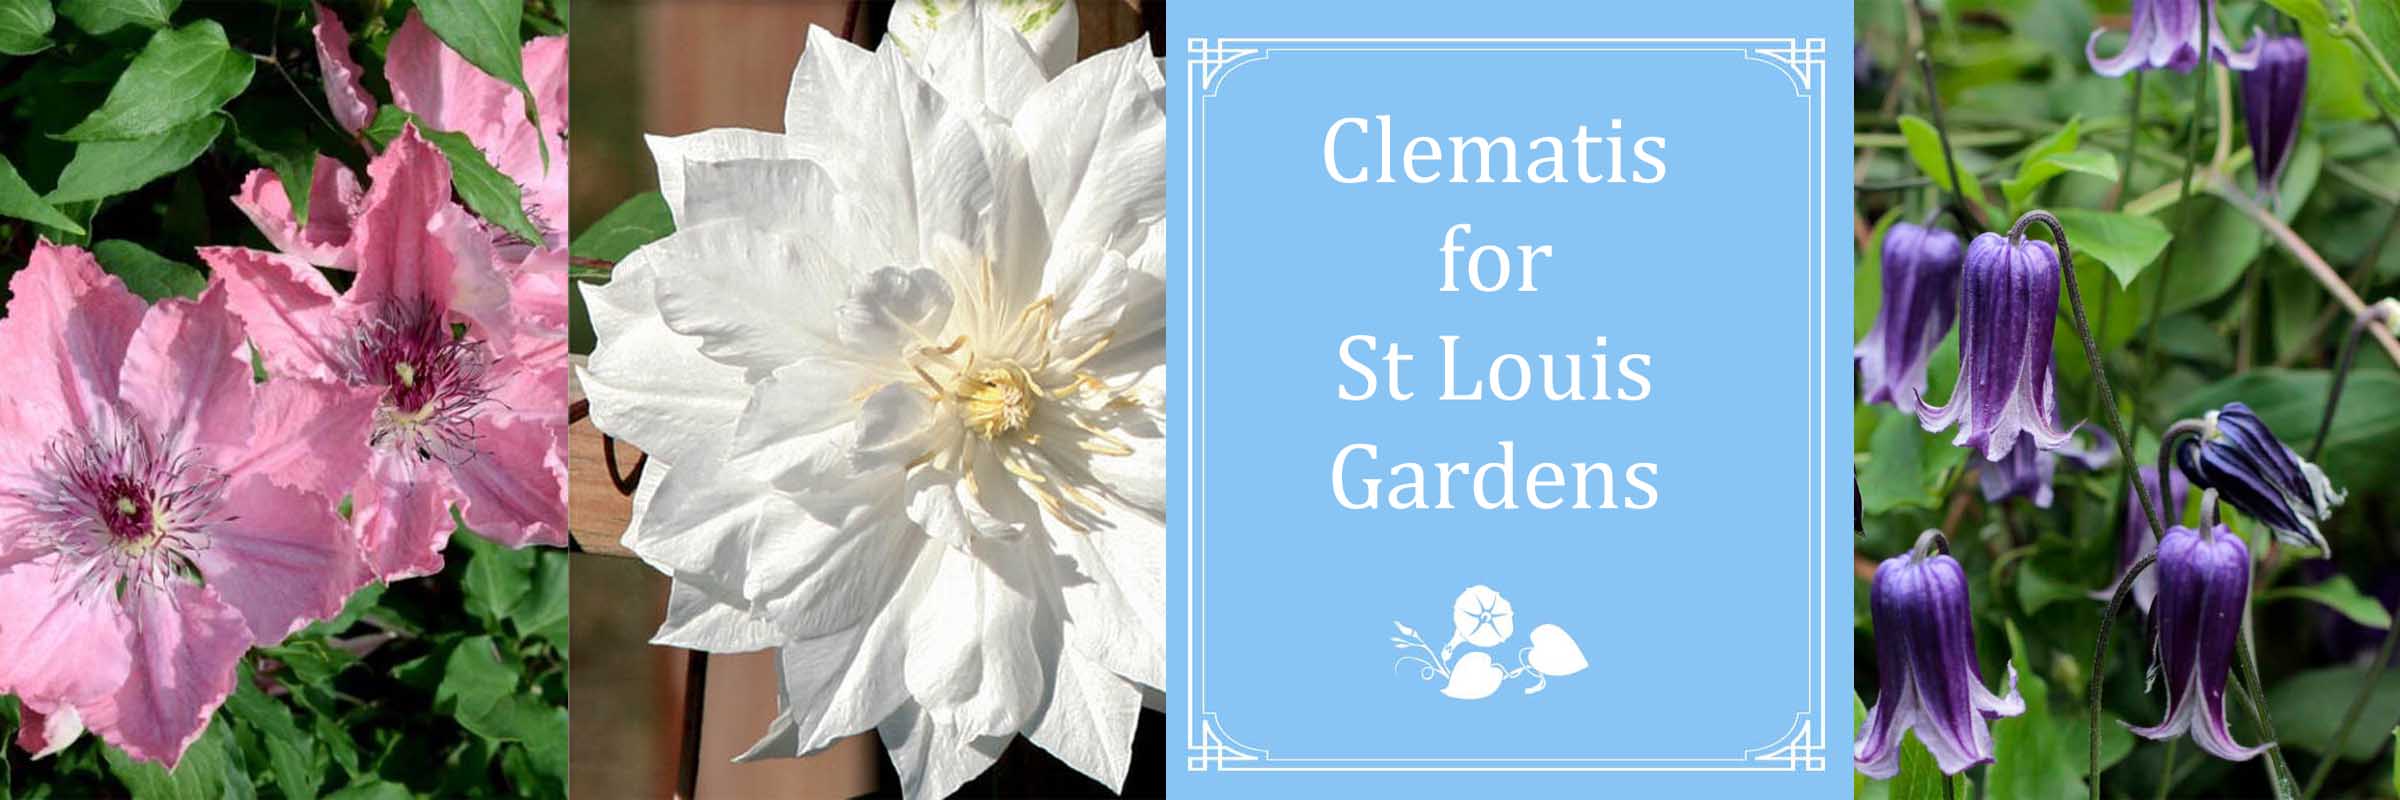 Clematis for St Louis Gardens